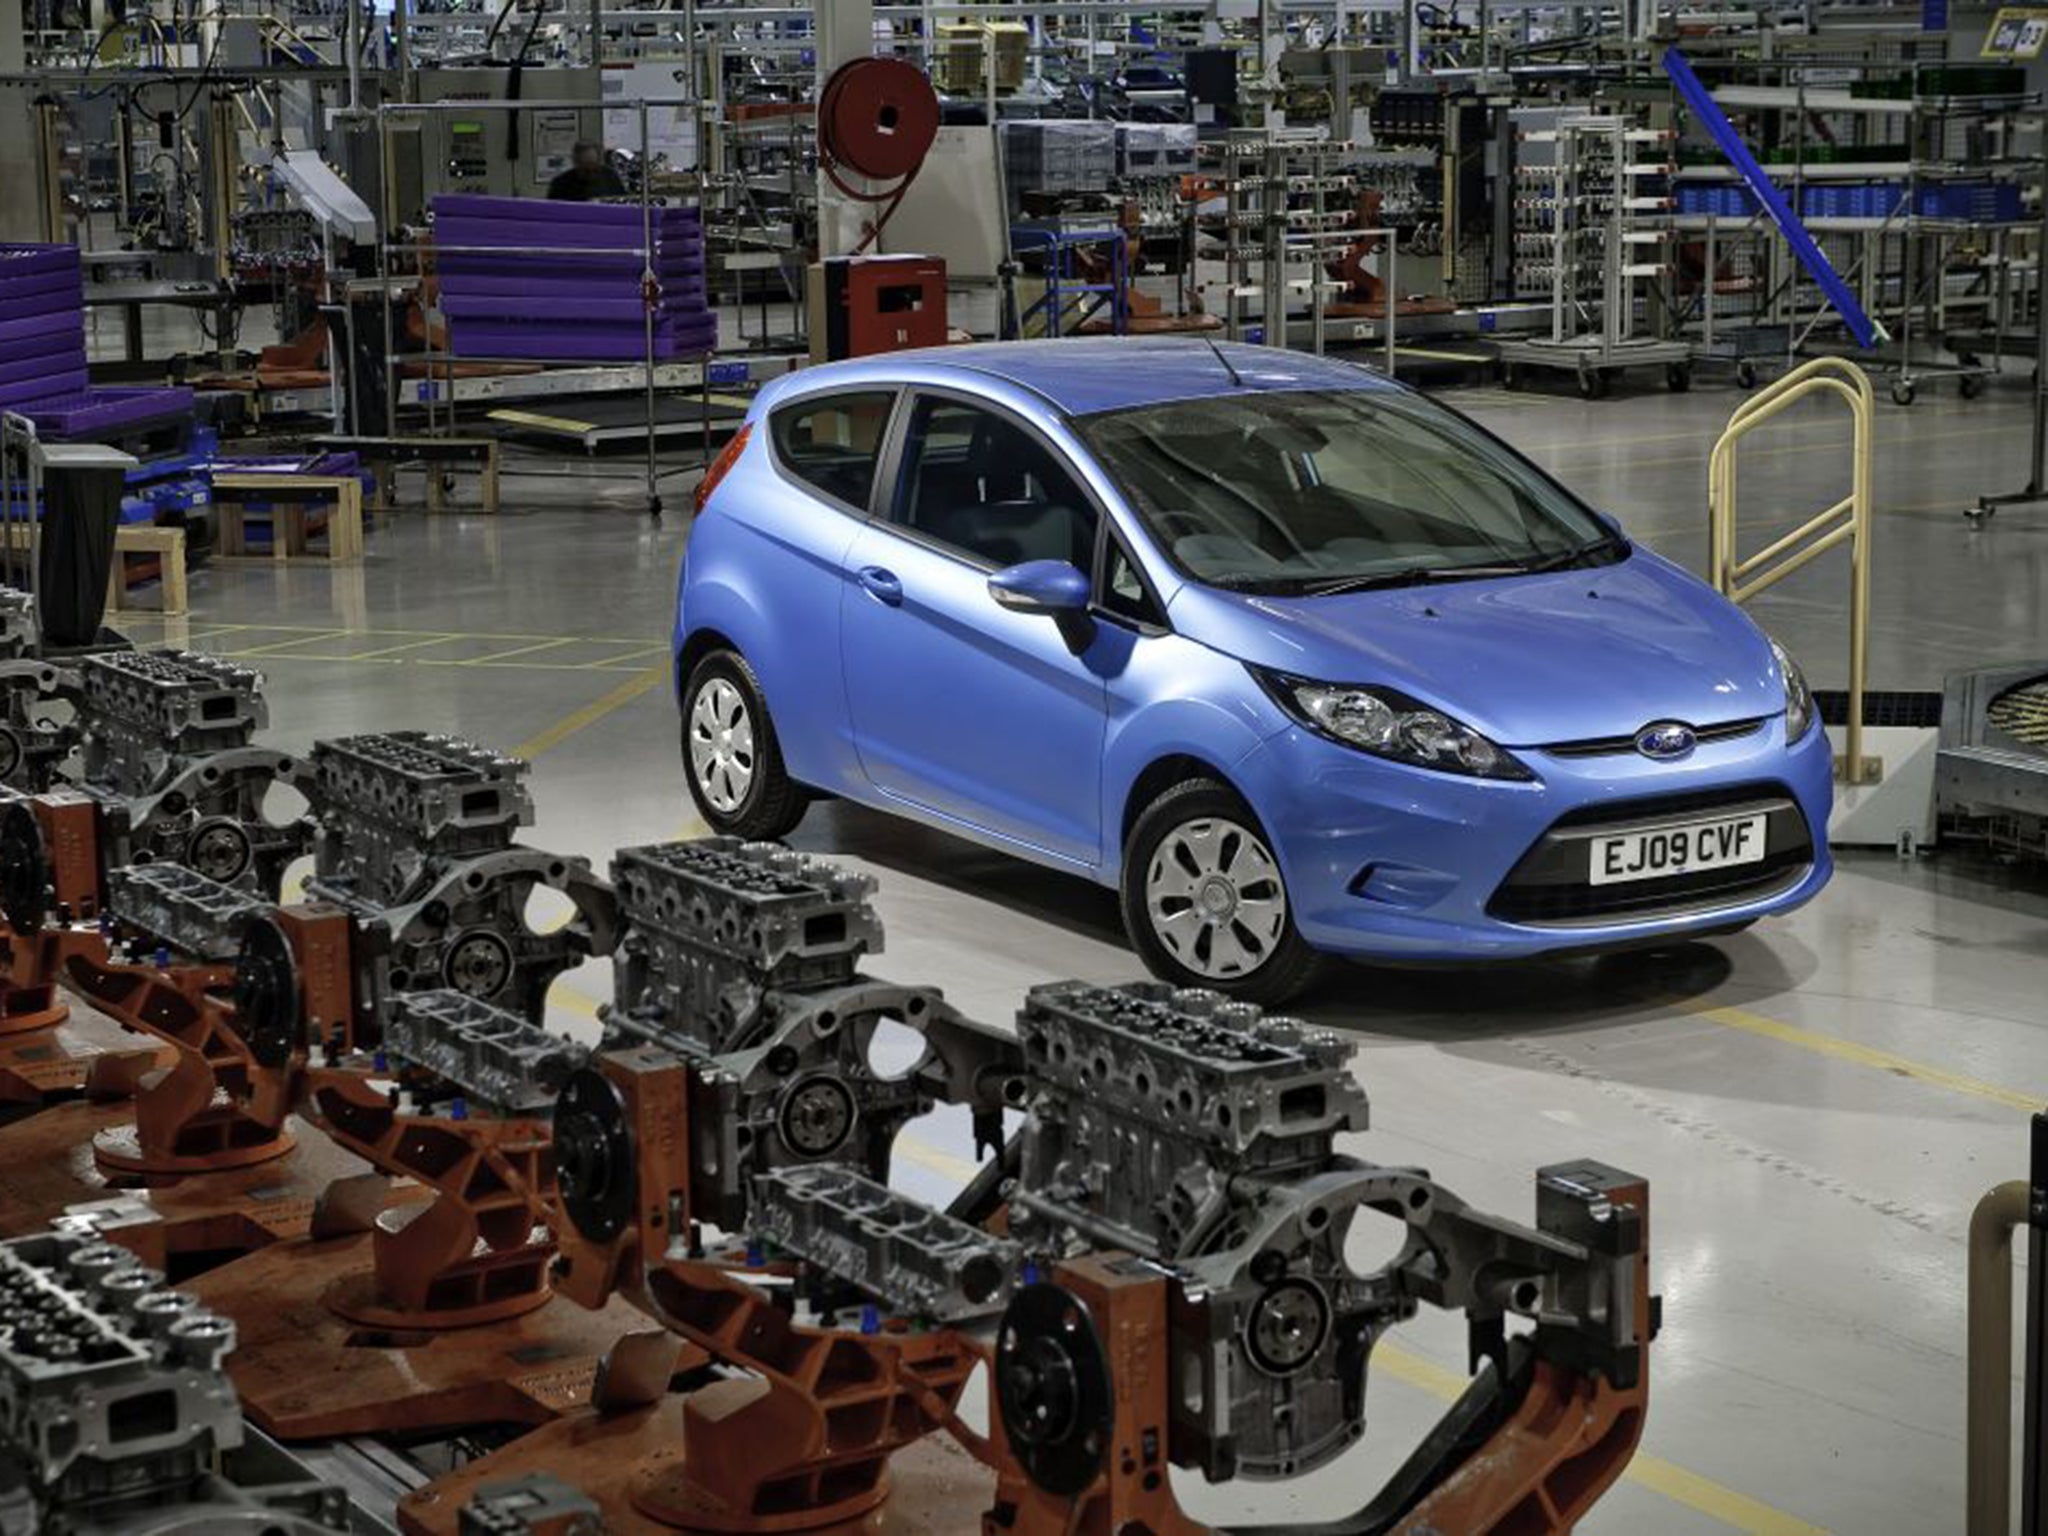 Ford B-Max diesel: The fuel is now being blamed for high particulate levels in the air